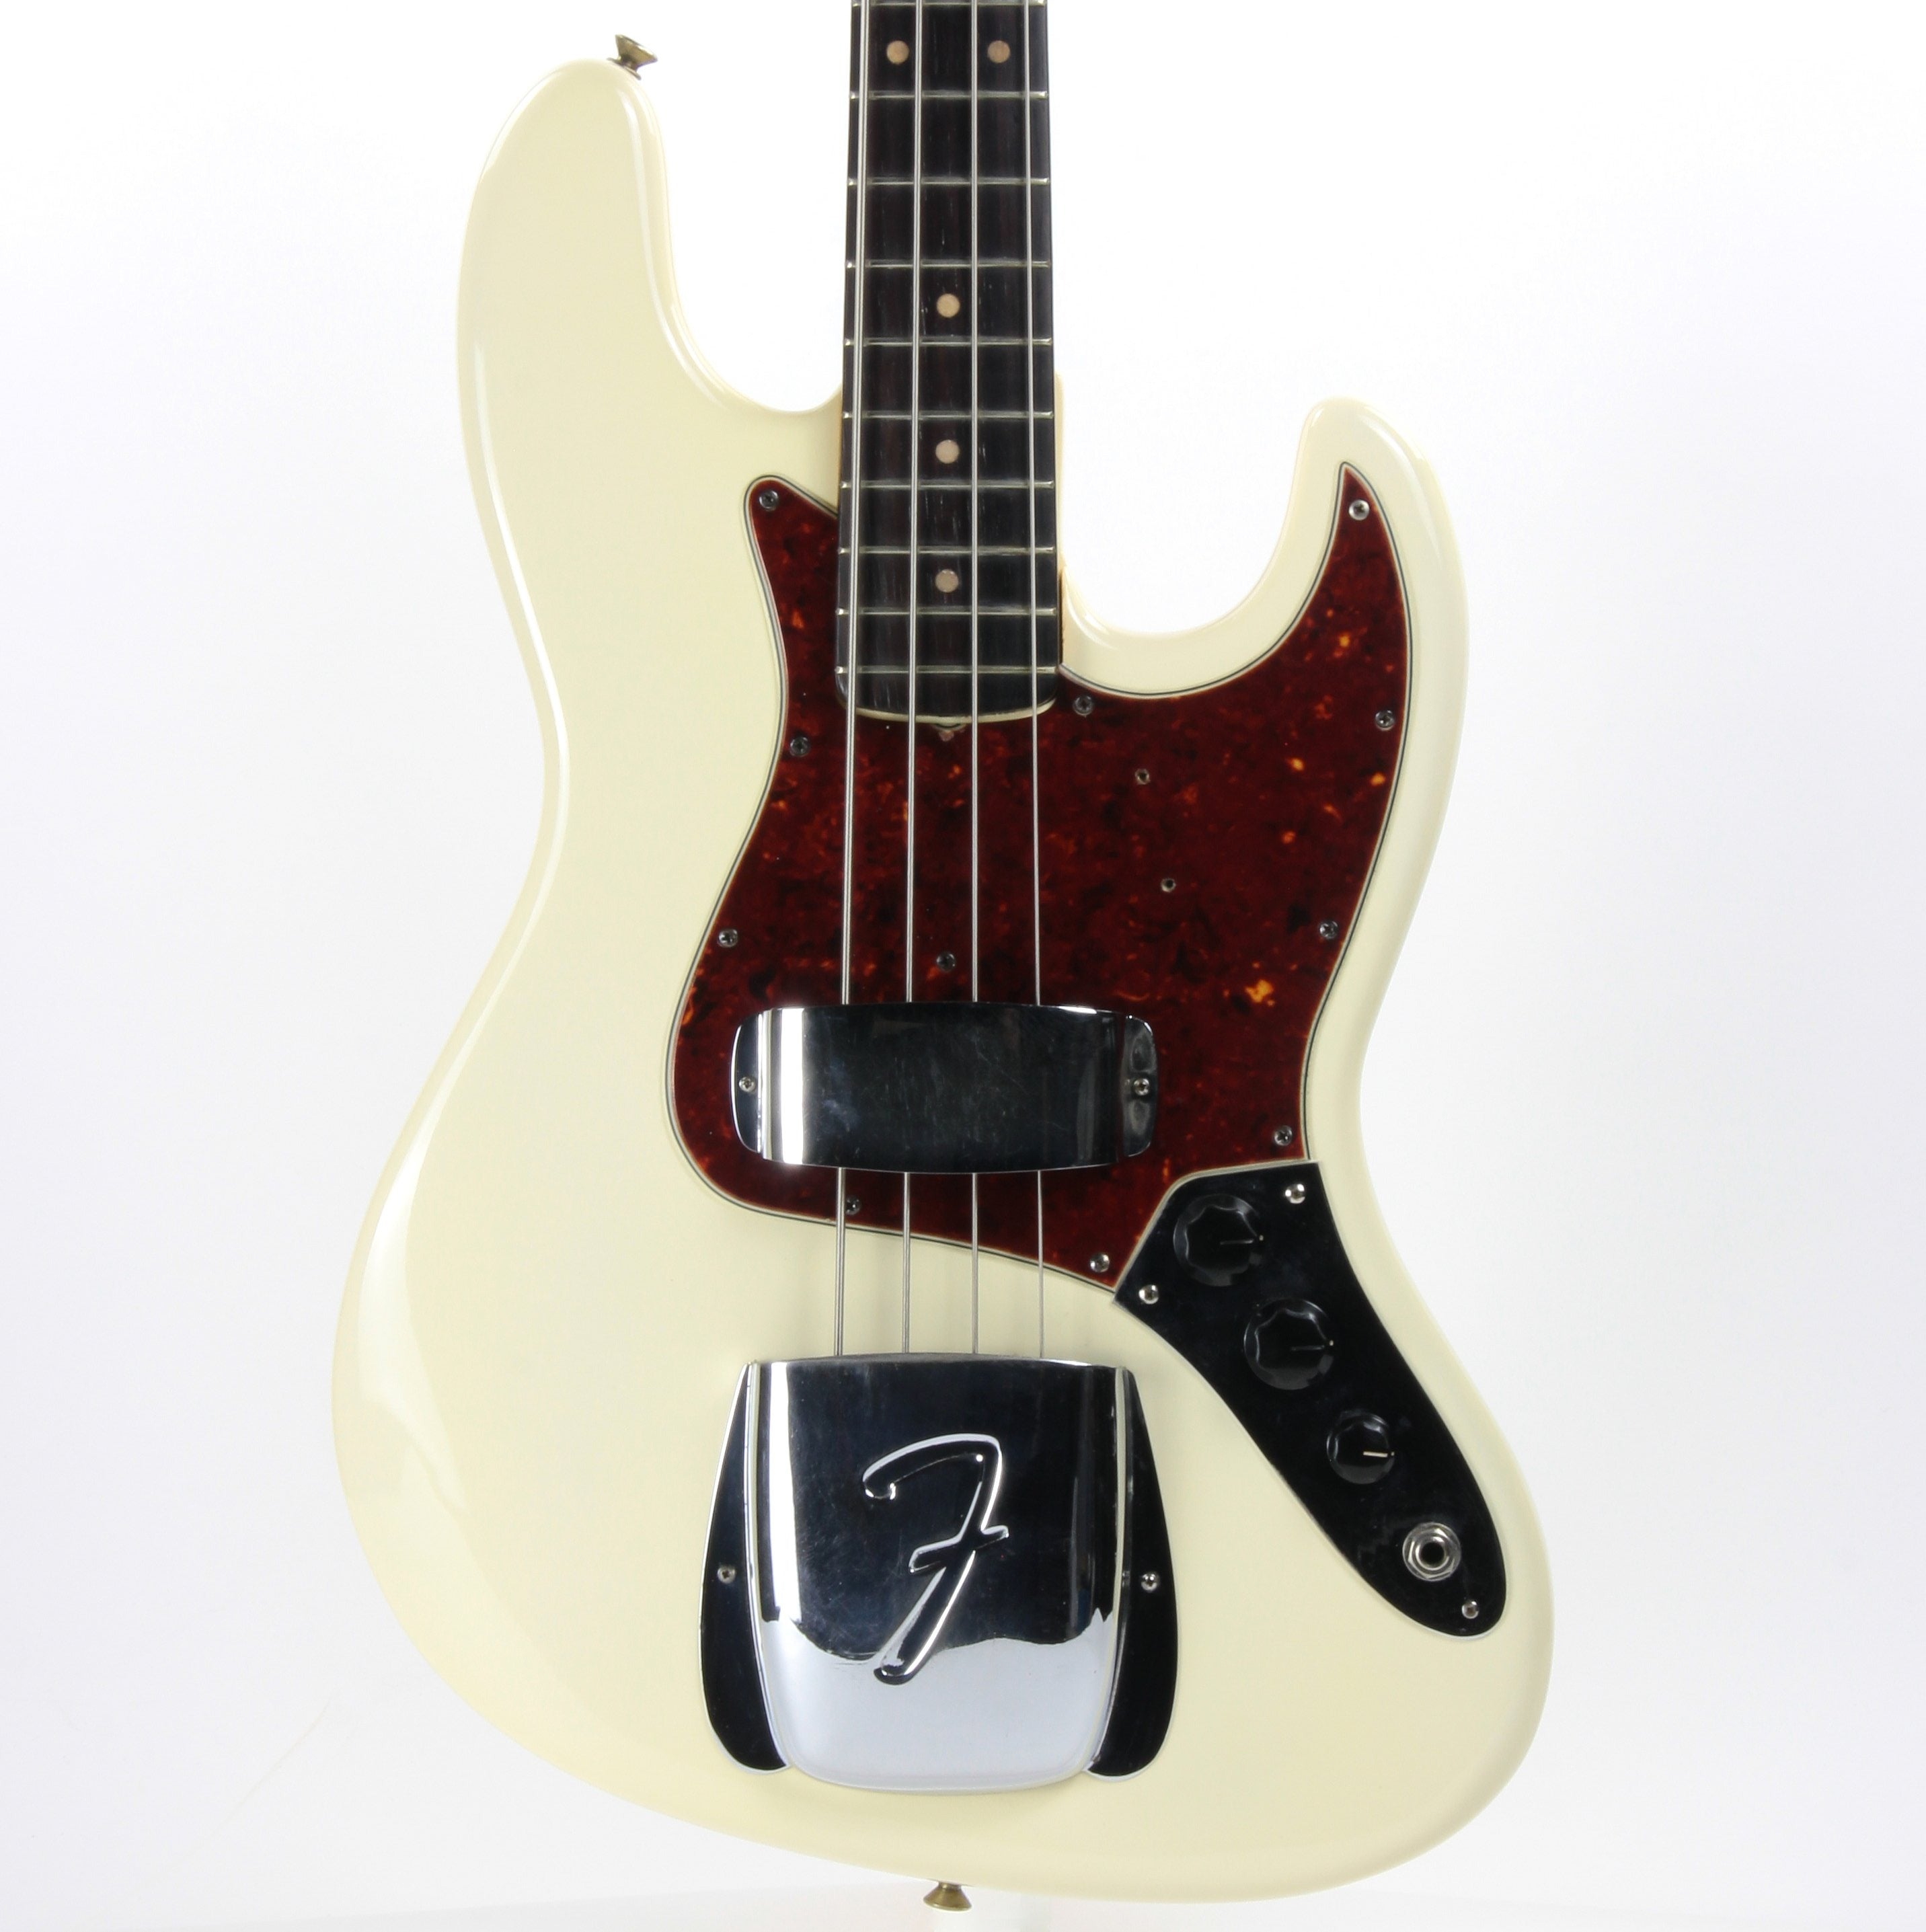 1964 Fender Jazz Bass Olympic White - Matching Headstock, Pre-CBS, Clay Dots, Vintage L-Series, Original Case